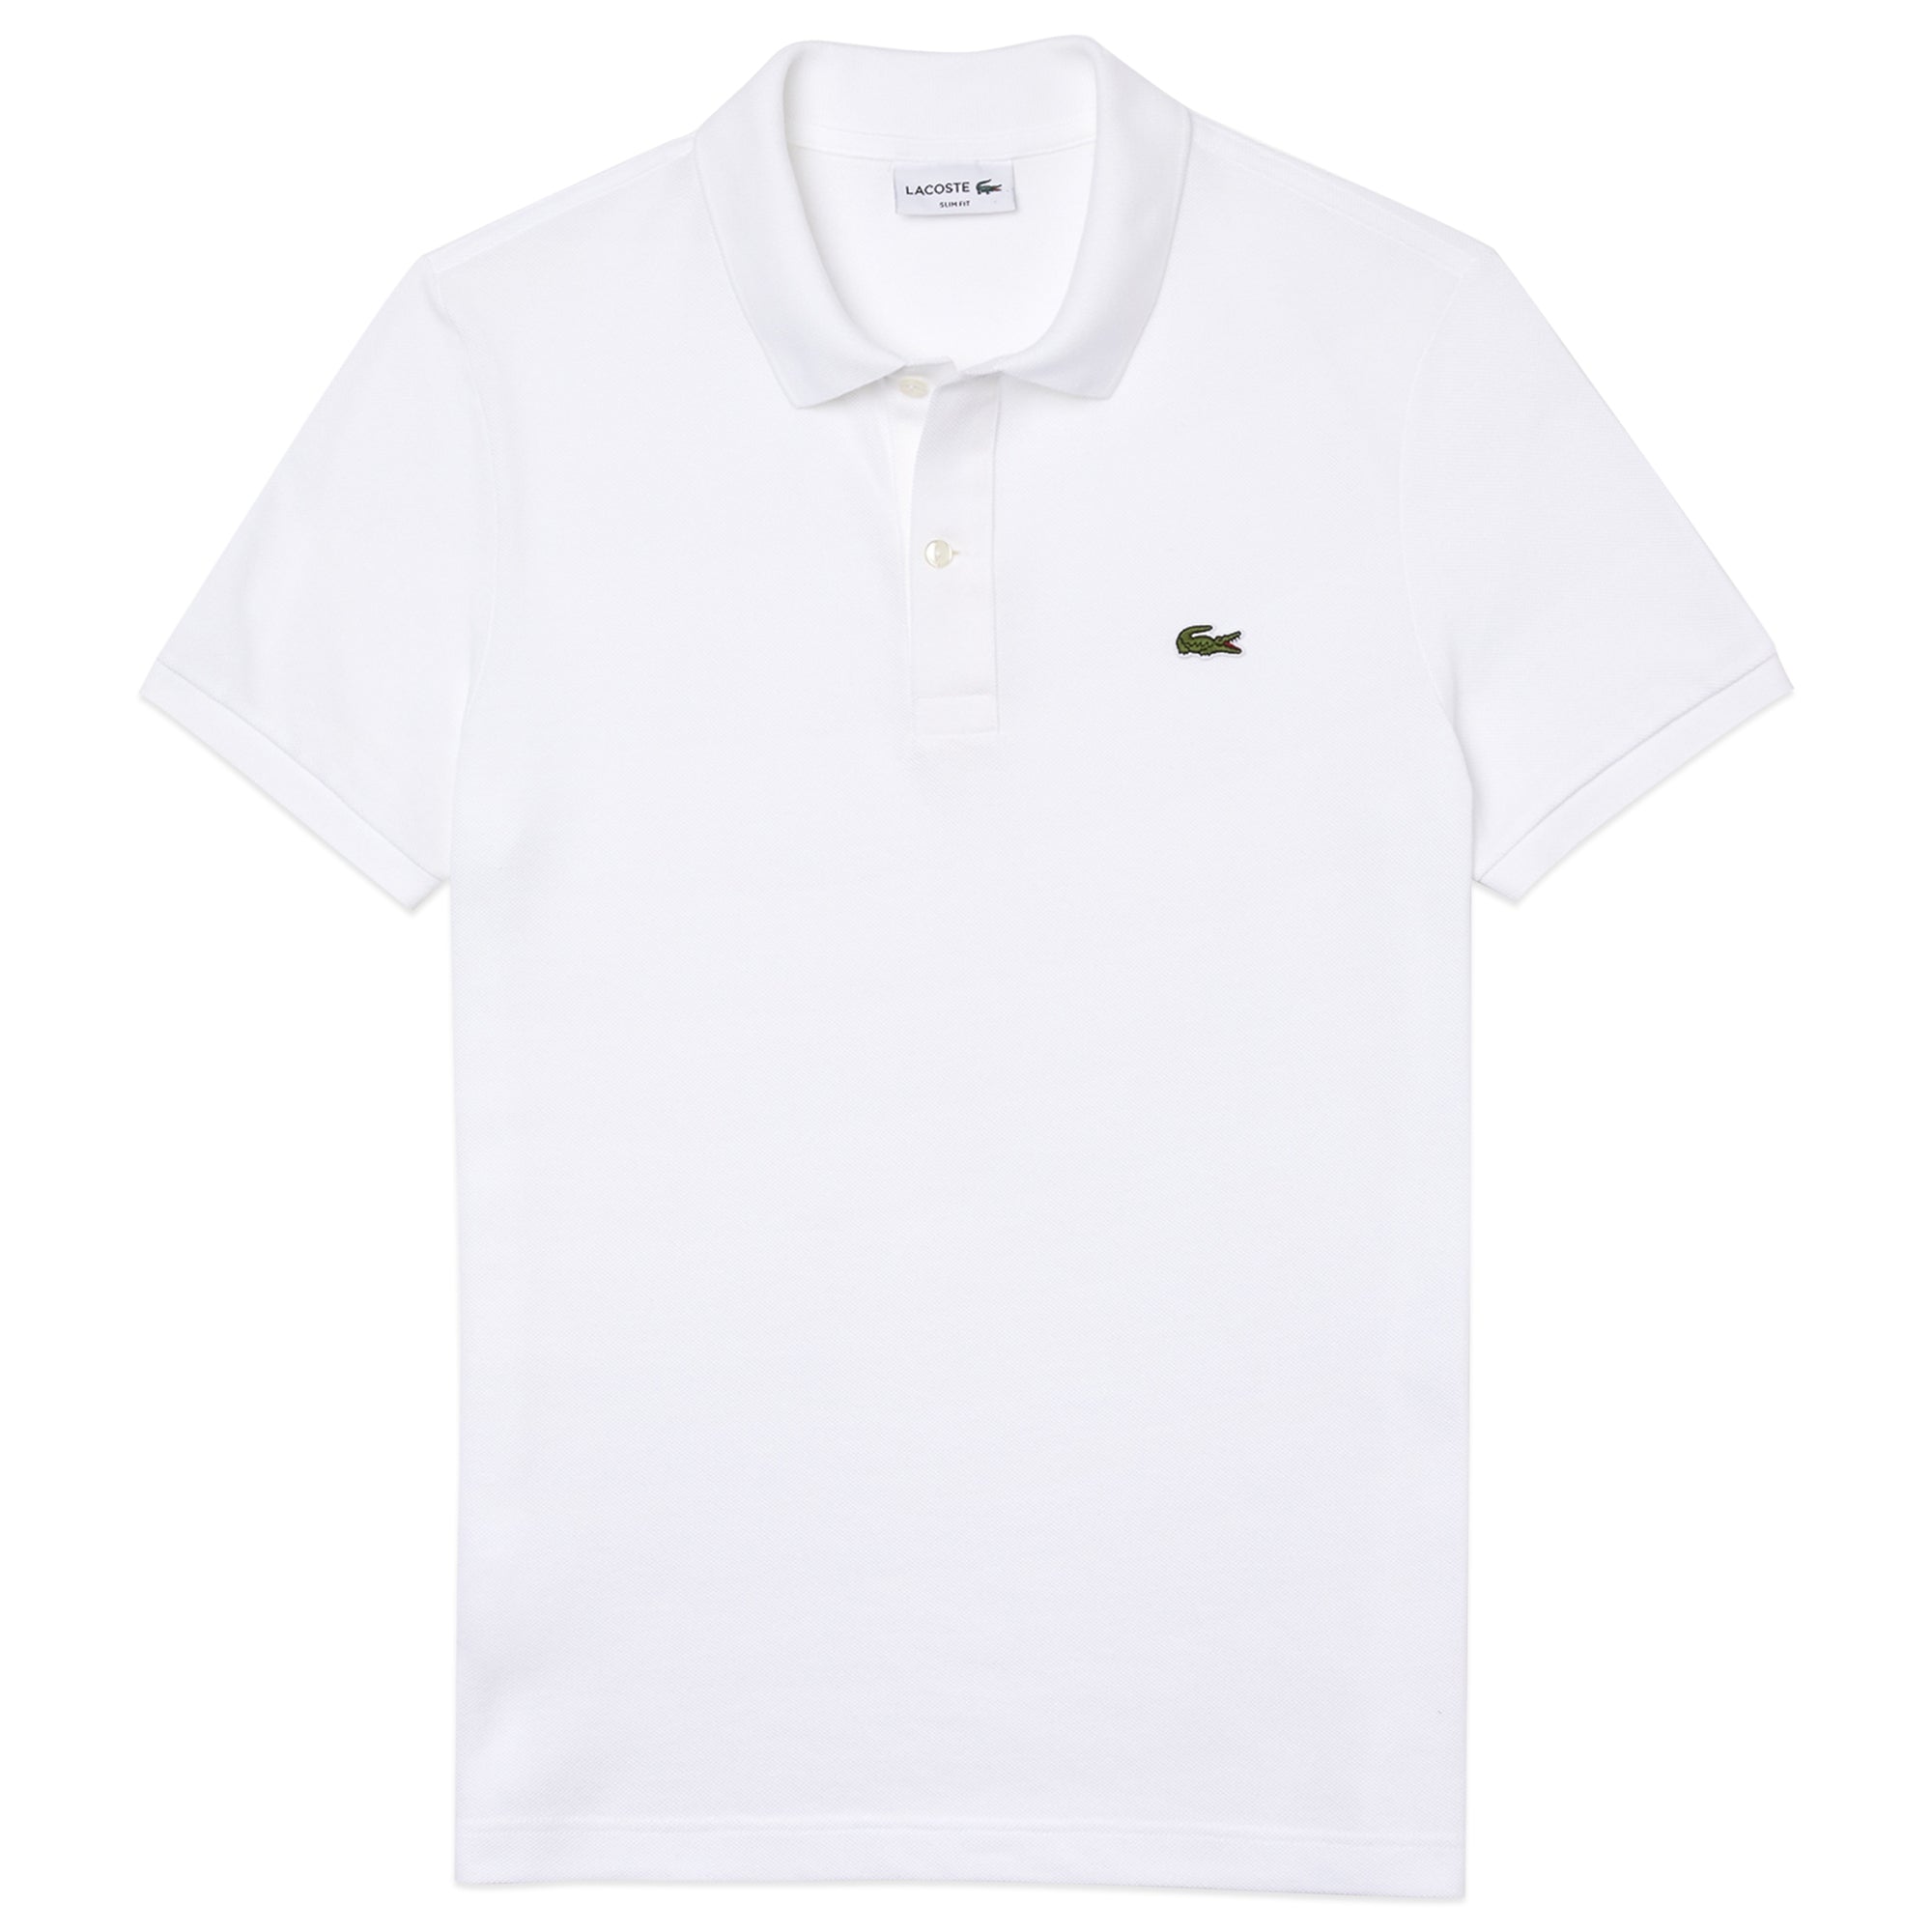 Lacoste Short Sleeved Slim Fit Polo PH4012 - White